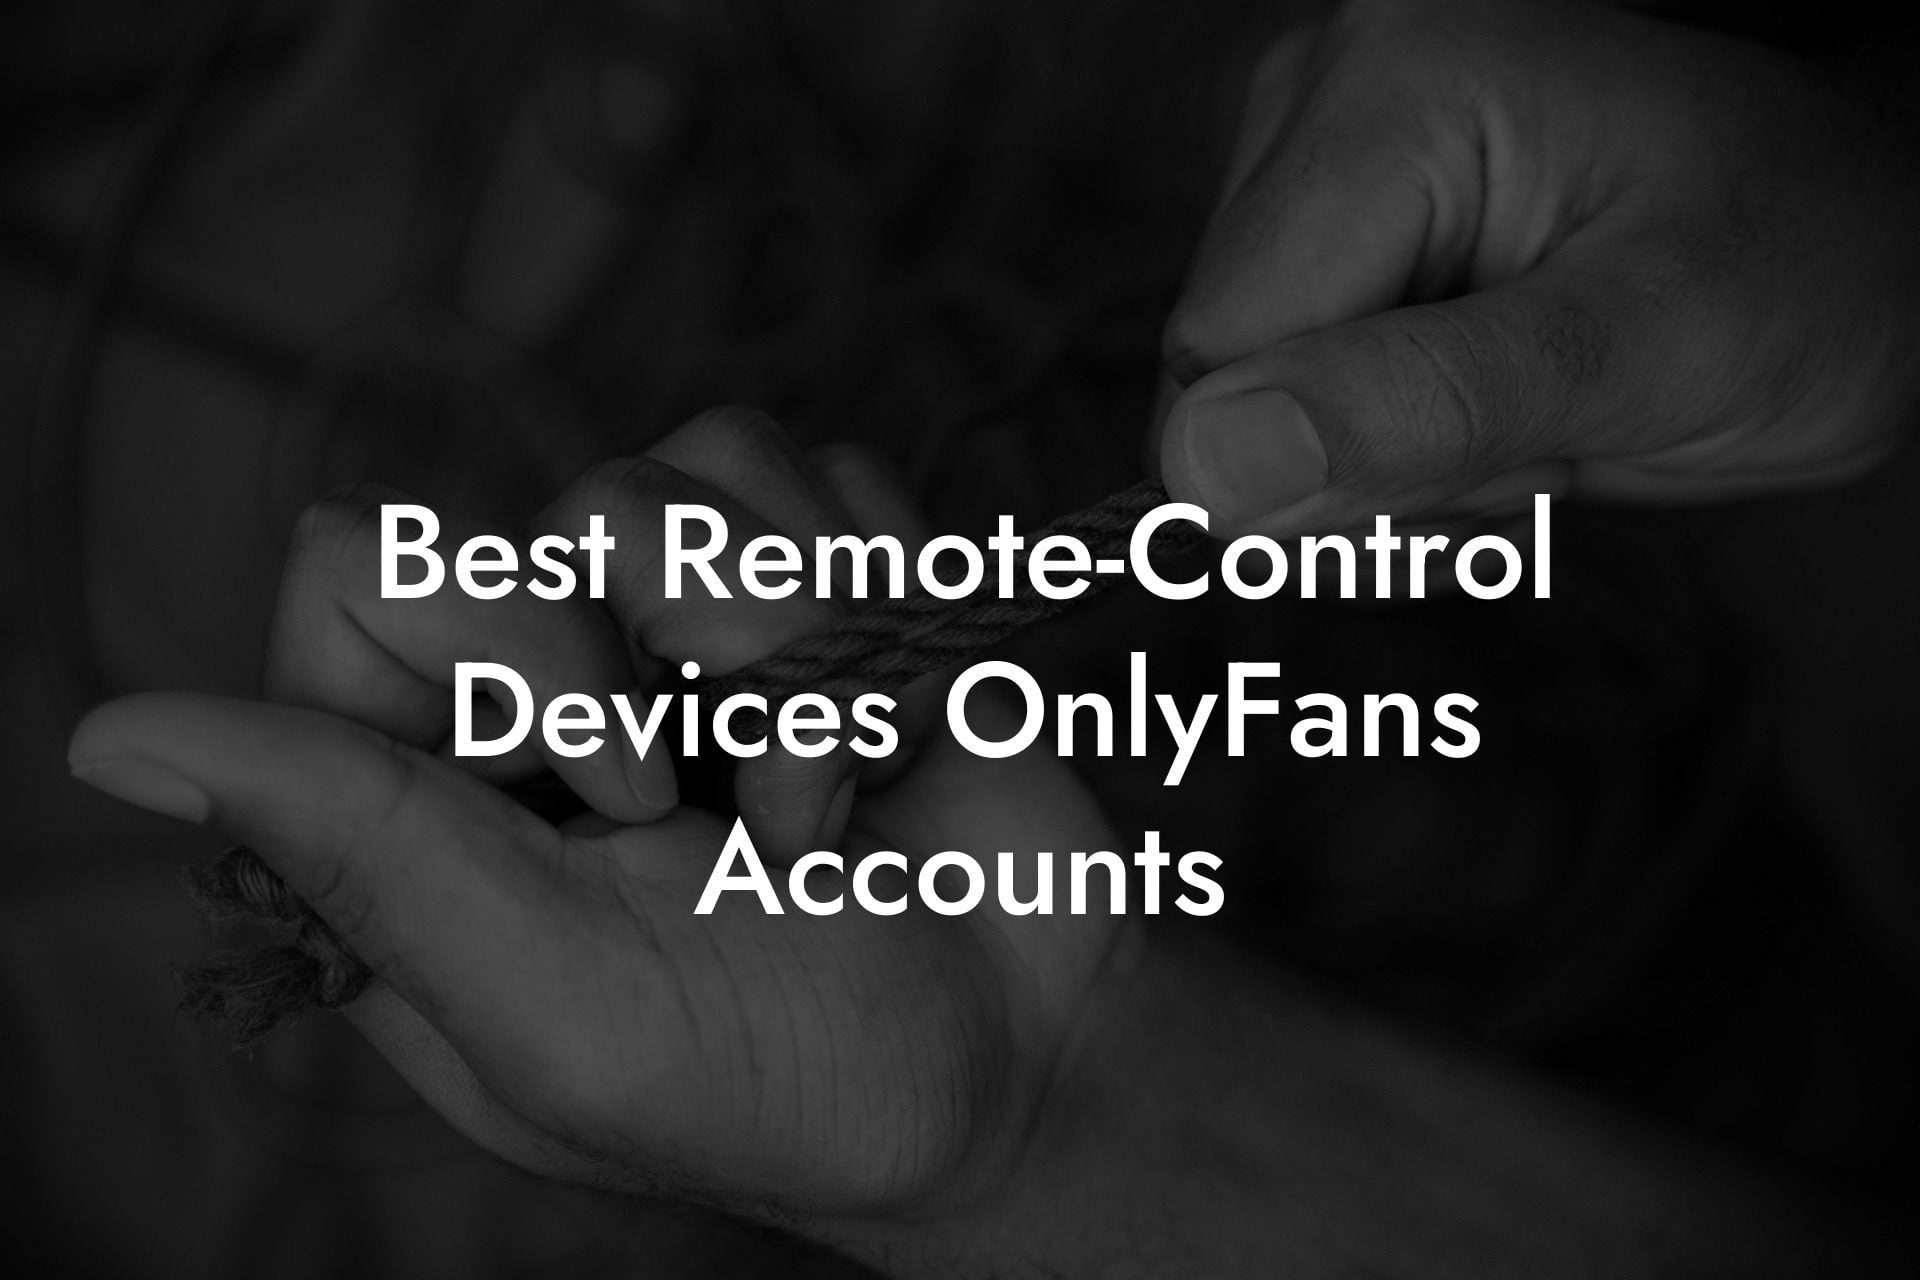 Best Remote-Control Devices OnlyFans Accounts